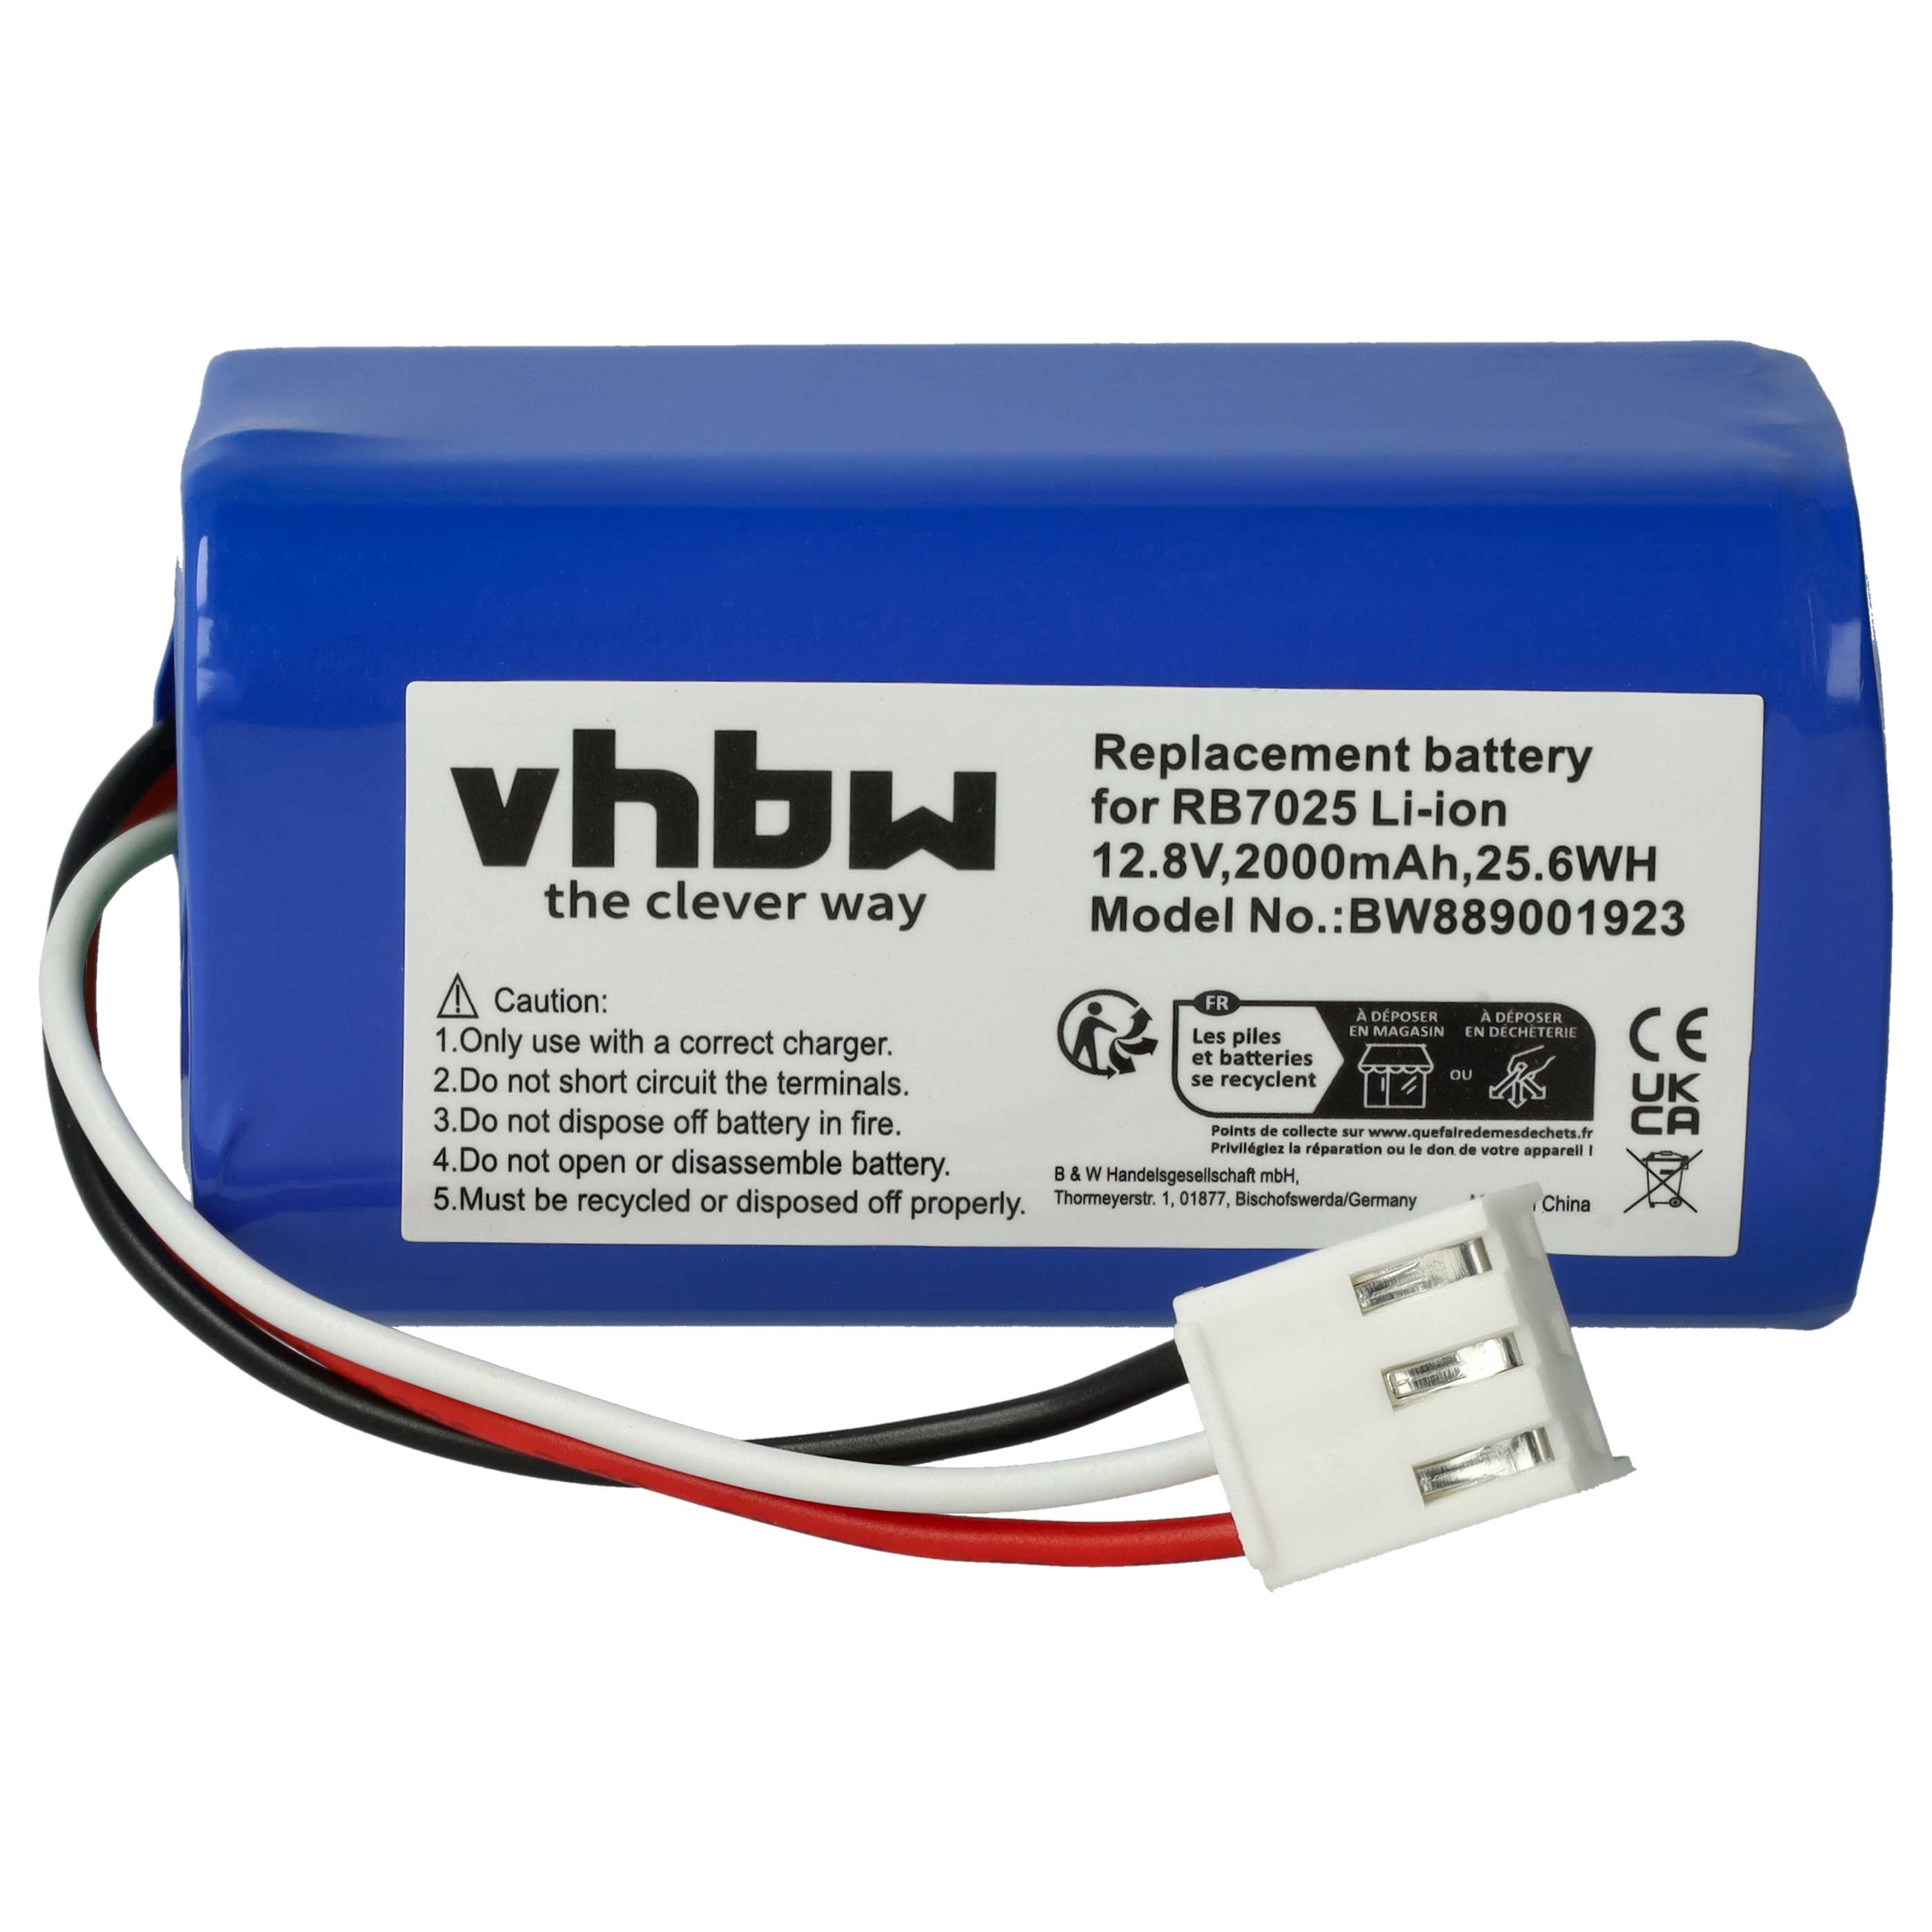 Battery Replacement for Philips CP0111/01, 4IFR19/66 for - 2000mAh, 12.8V, Li-Ion